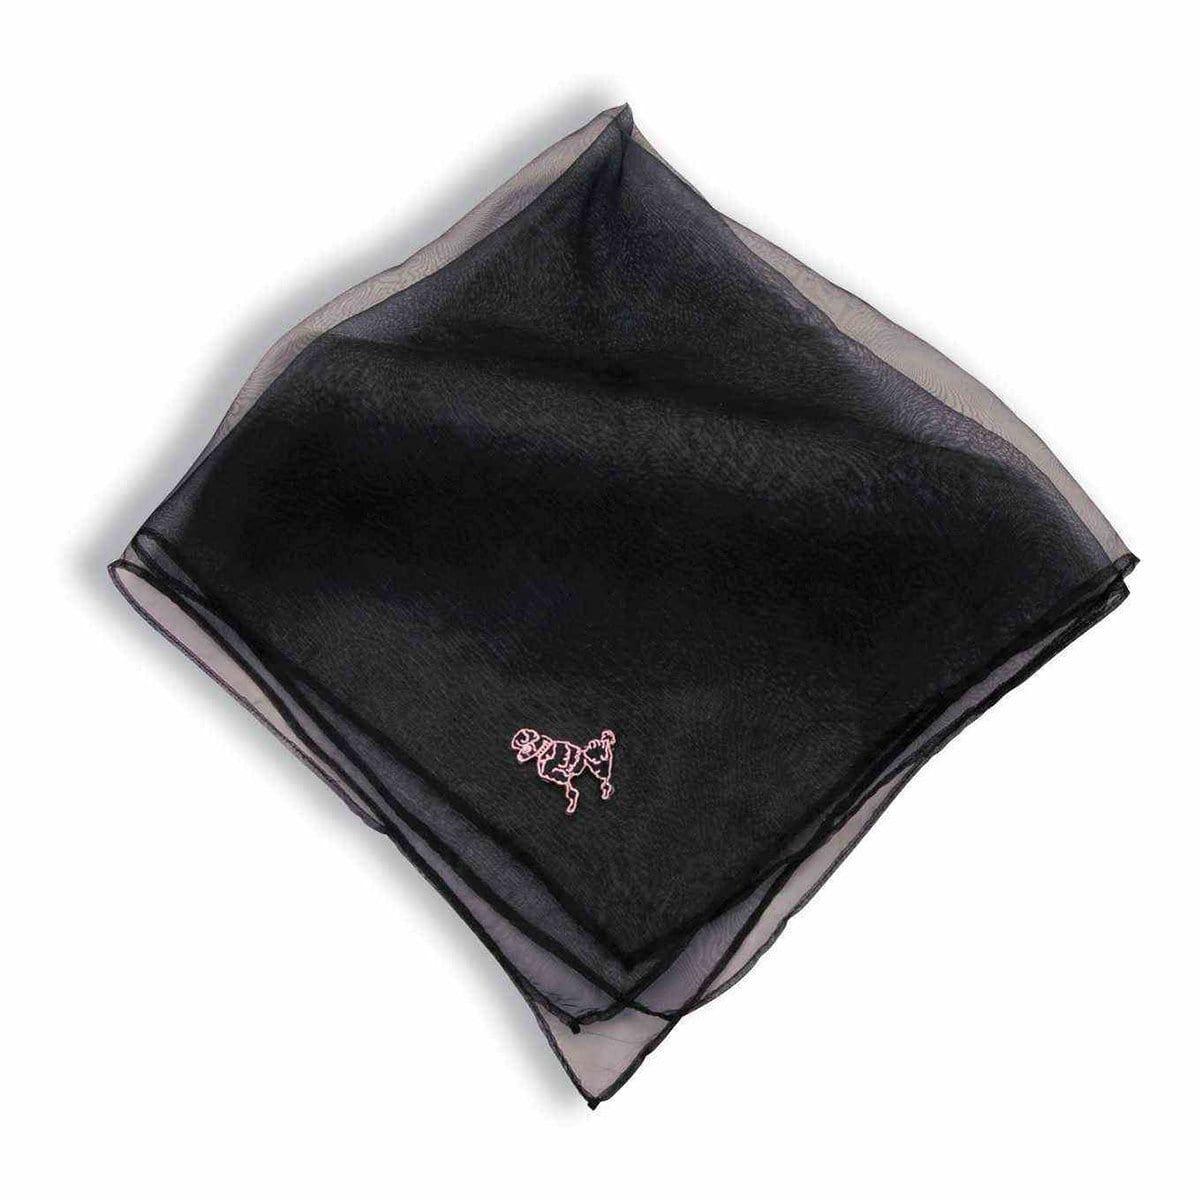 Buy Costume Accessories Black poodle scarf sold at Party Expert